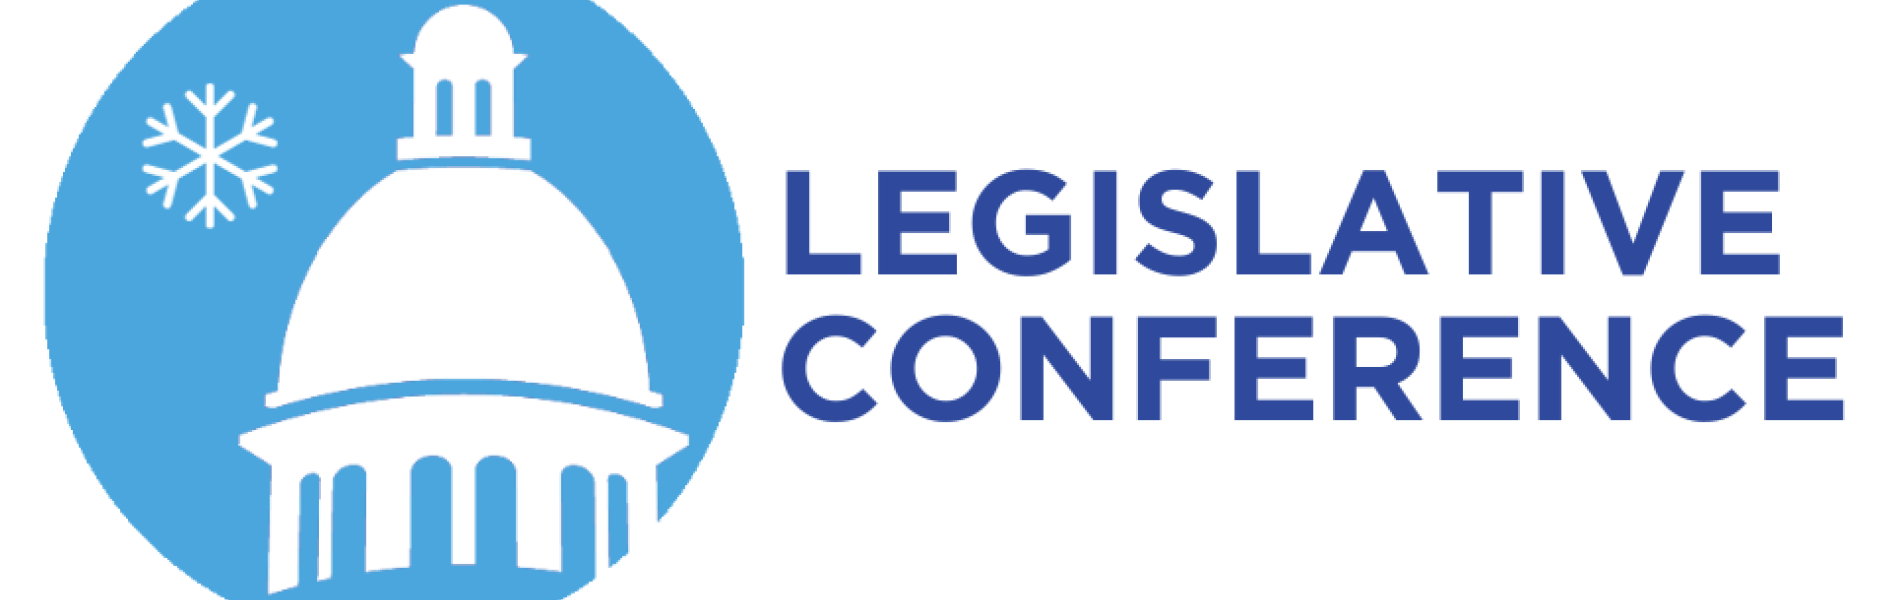 light blue conference logo with white state house dome and snowflake and dark blue text with conference name